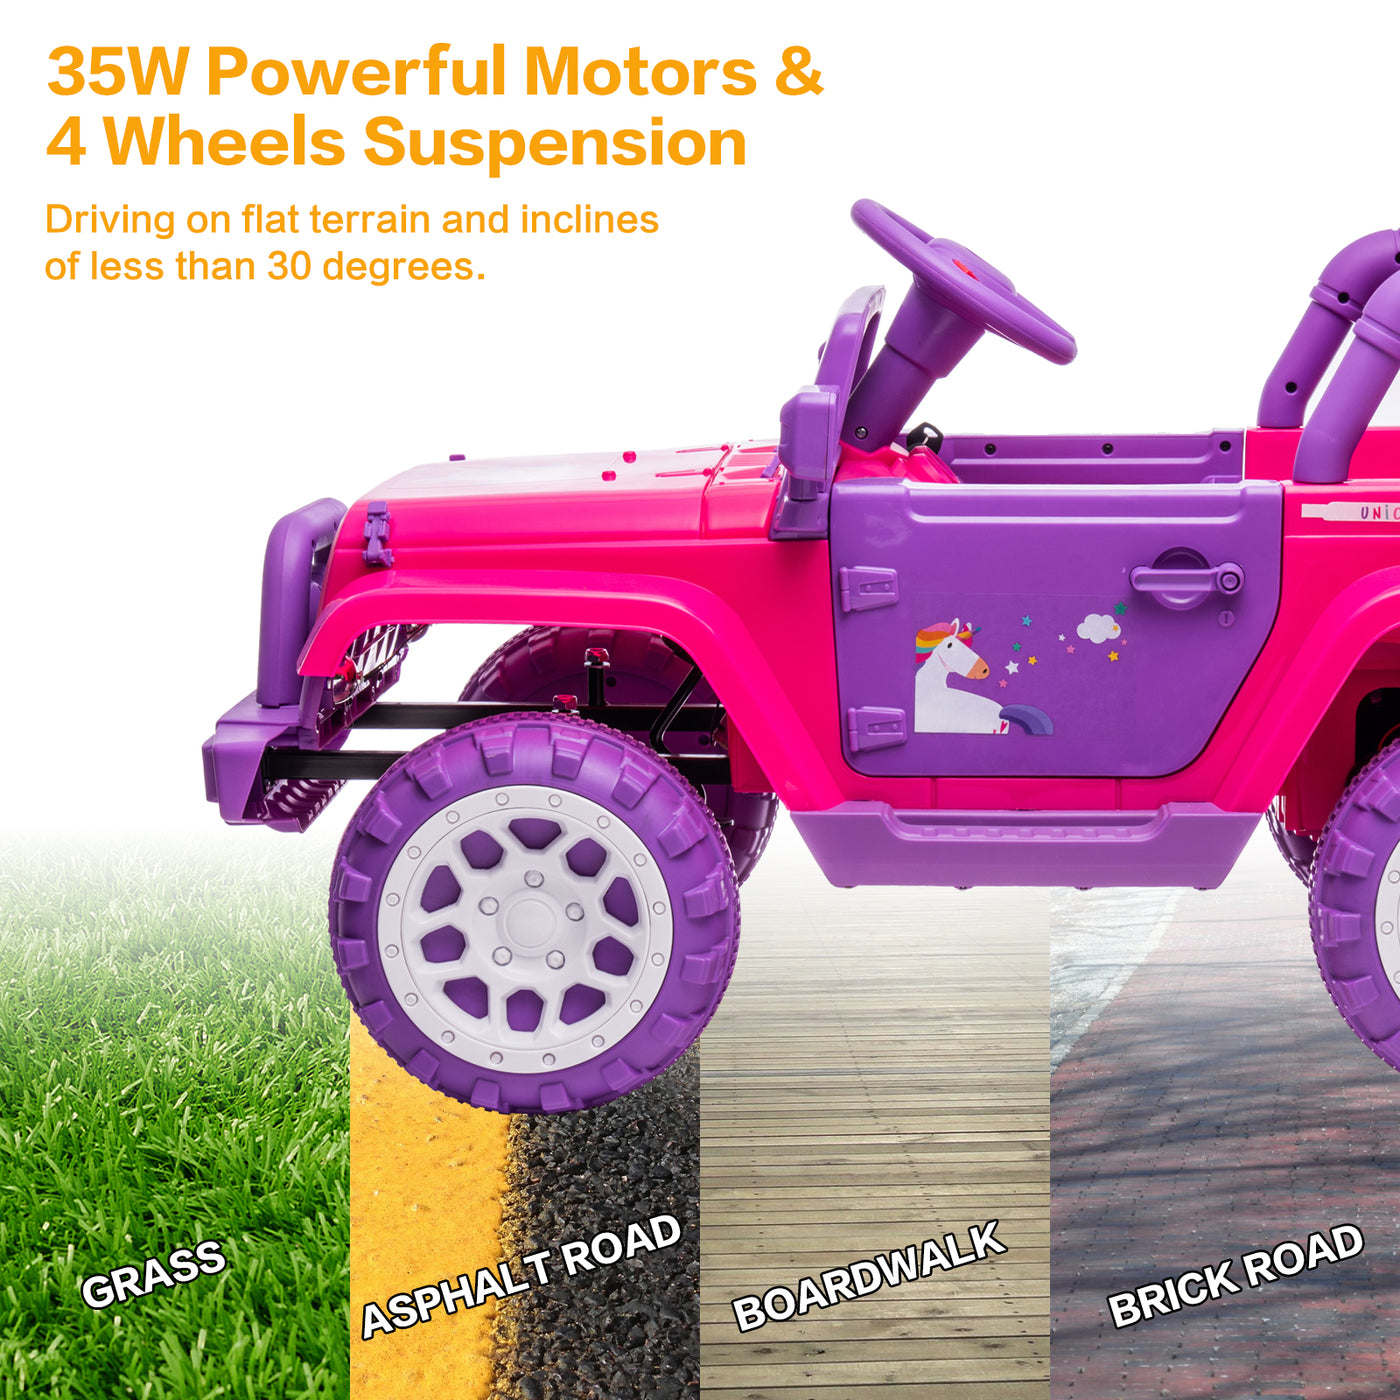 12V Jeep Electric Car Kids Ride On Car with Parent Remote Control, Unicorn DIY Stickers, 2 Motors, LED Light, Openable Door